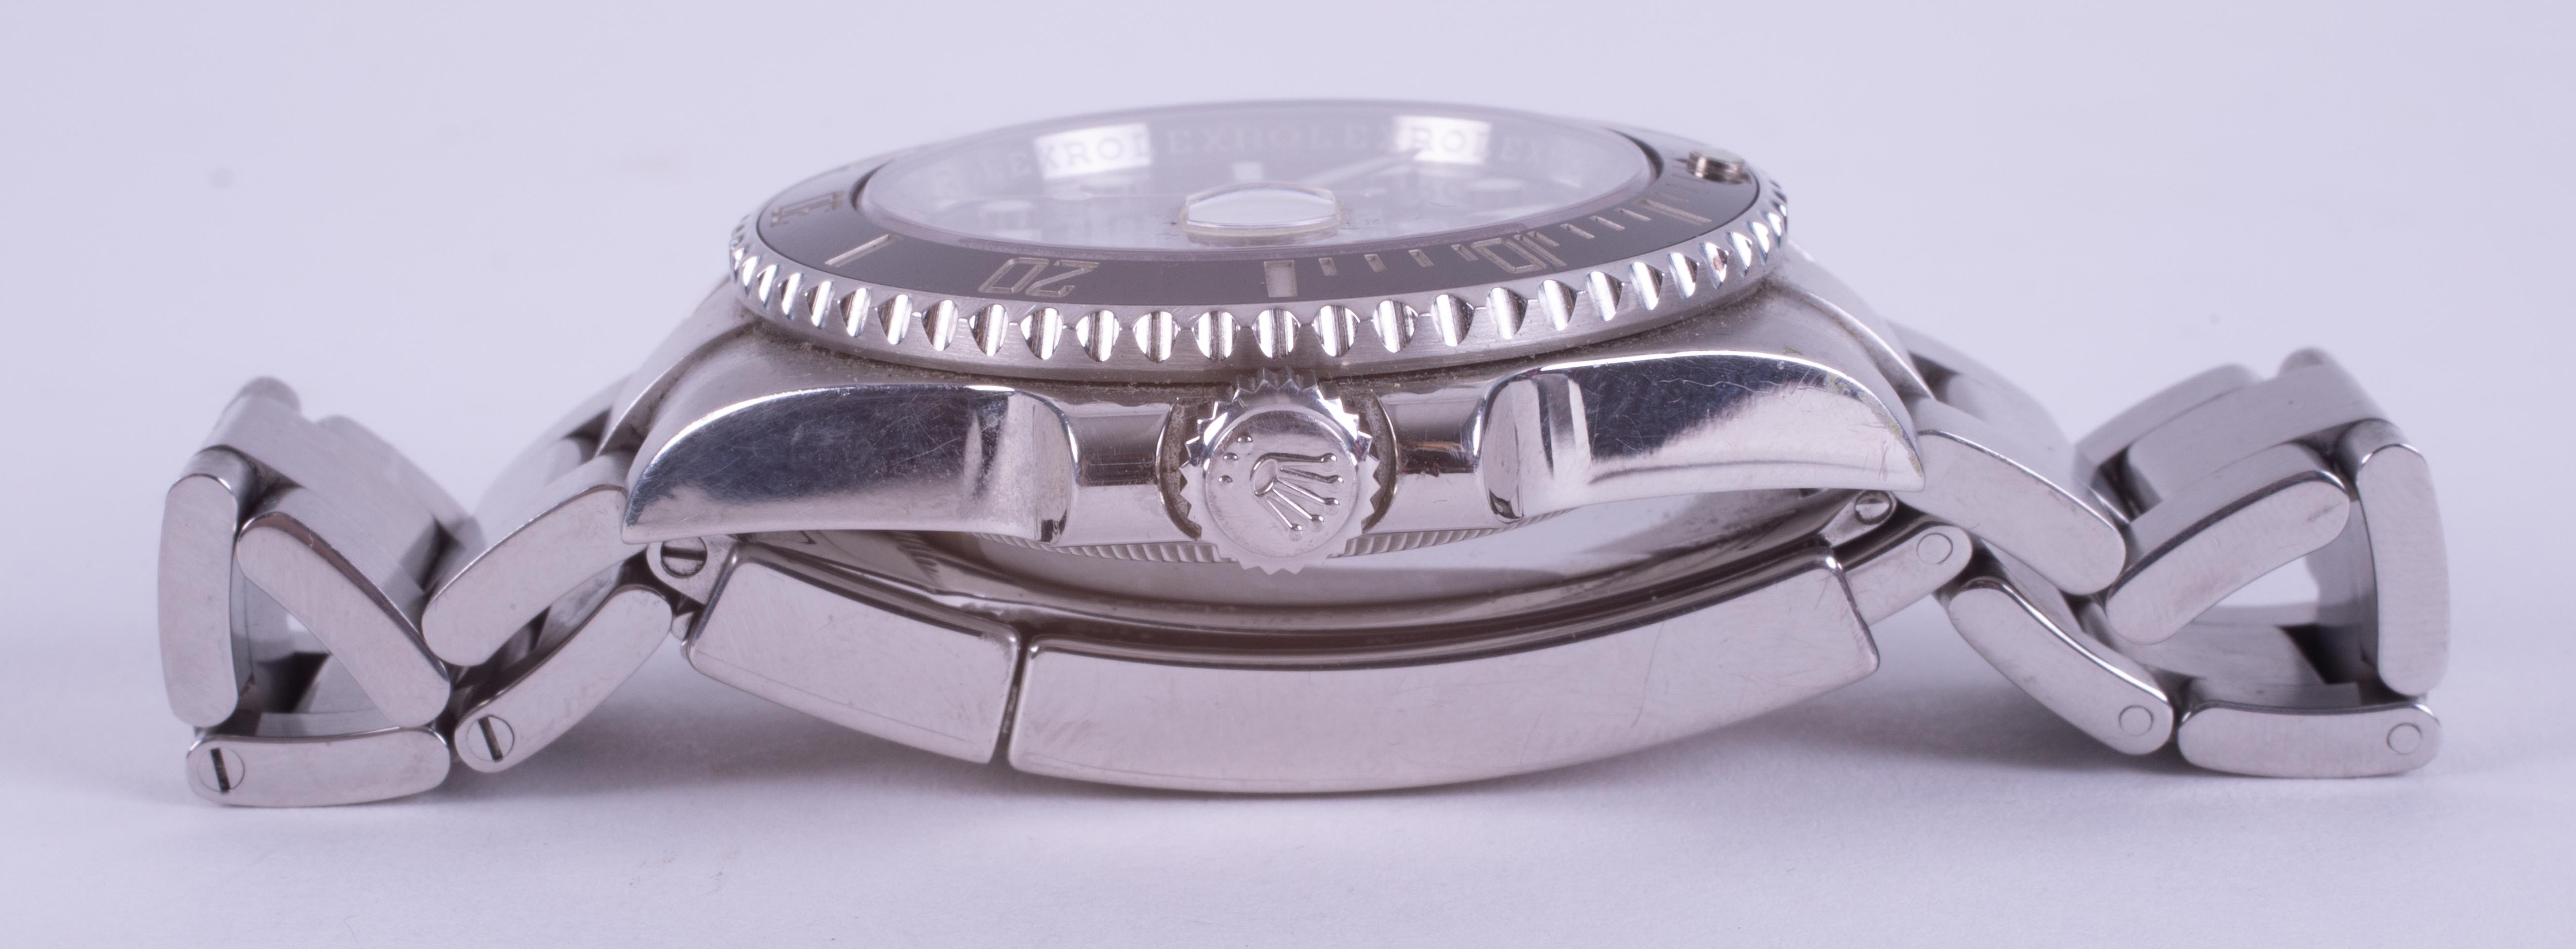 Rolex, a gent's Rolex Oyster Perpetual Submariner stainless steel automatic wristwatch with date - Image 5 of 7